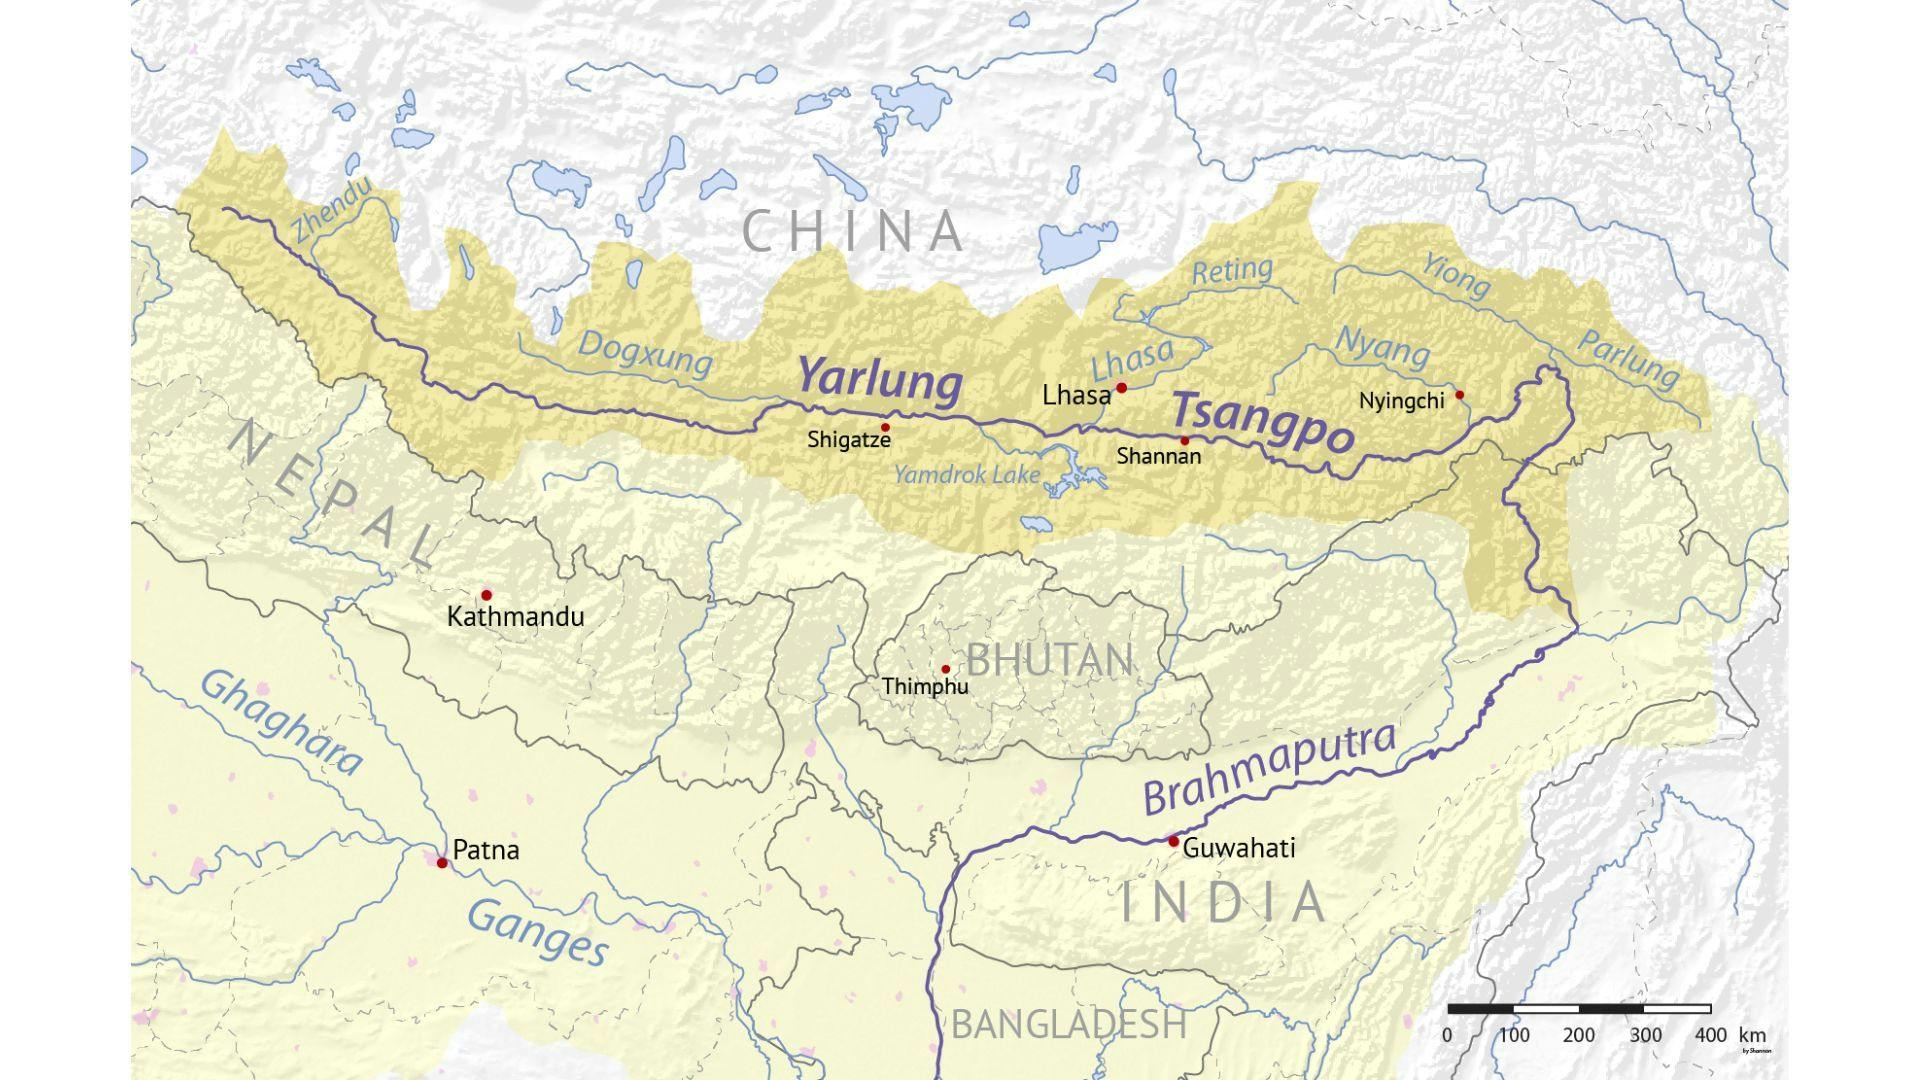 Nain Singh Rawat figured out that the Tsang-po River in Tibet was a tributary of the Brahmaputra | Wikimedia Commons